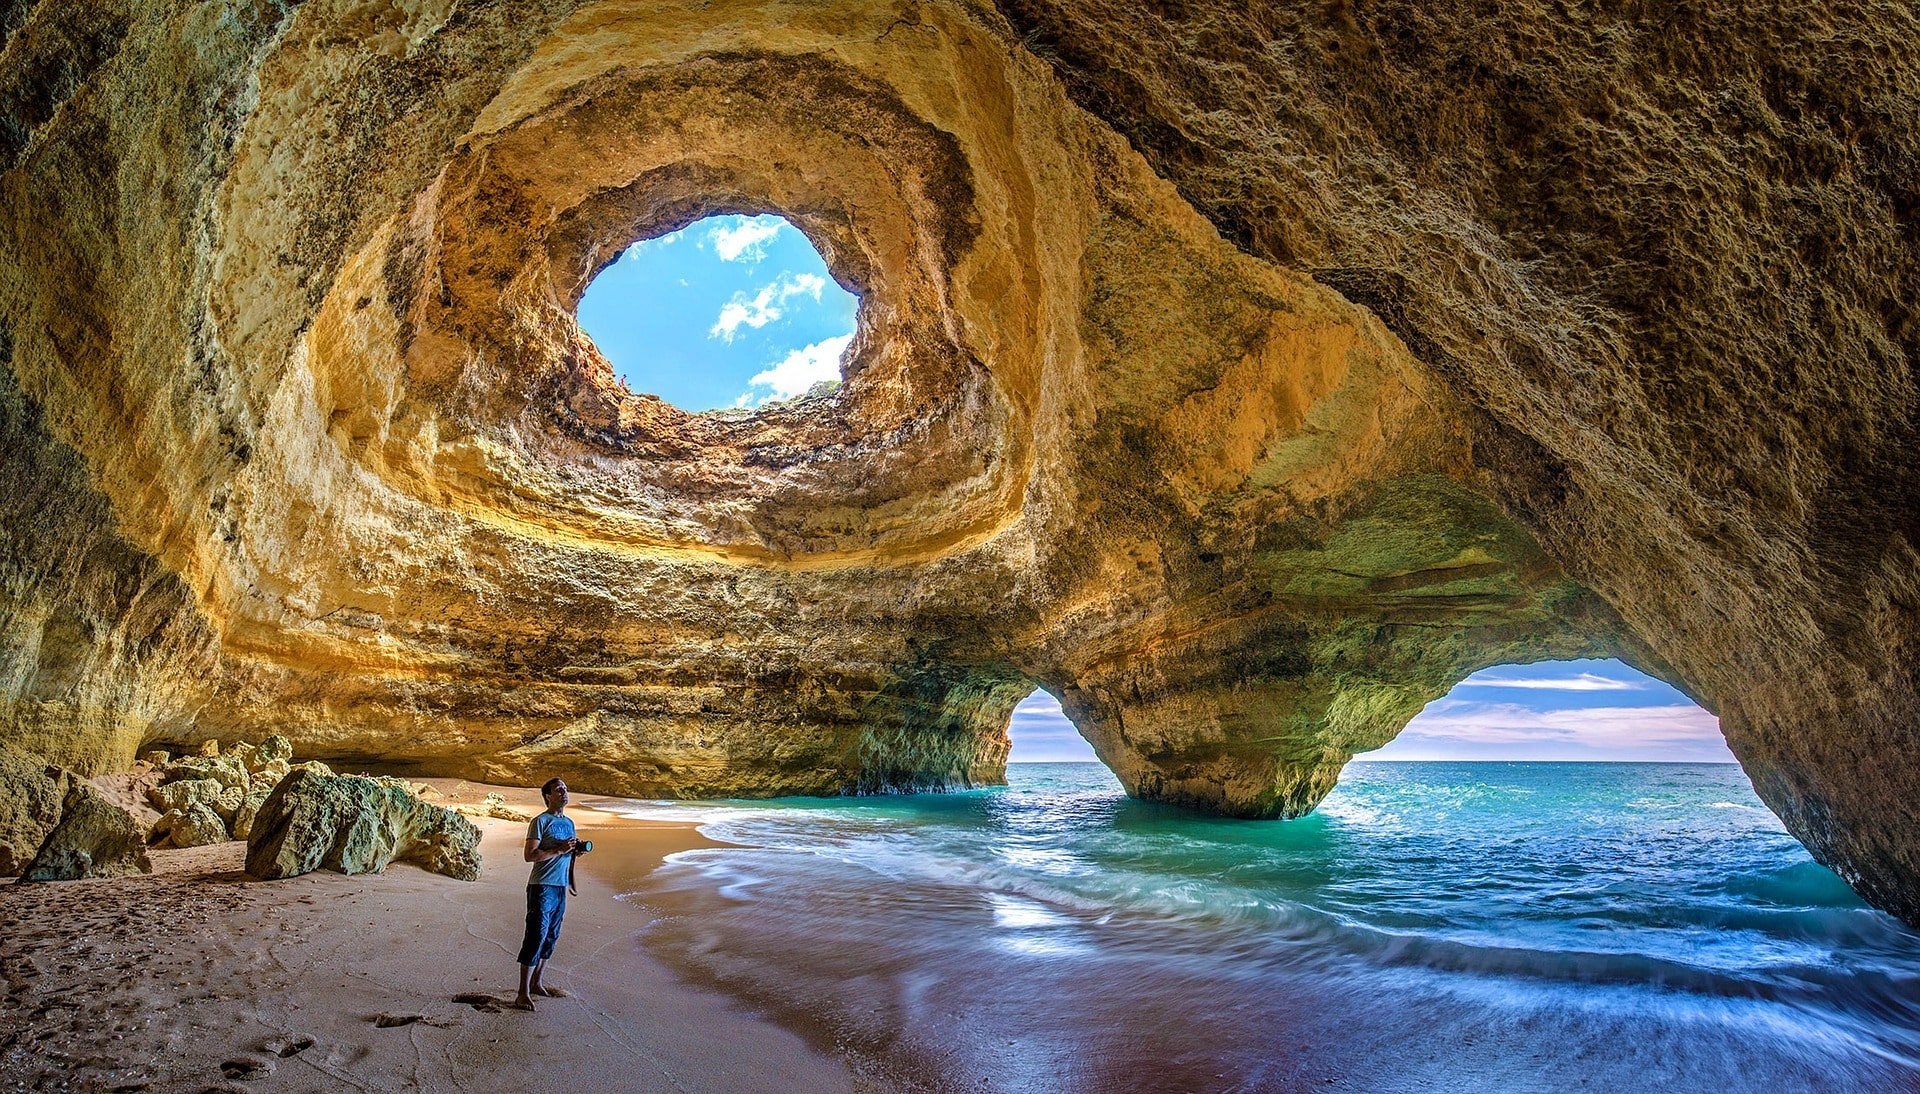 One of the best things to do in Faro, Portugal is to visit the Benagil Caves which is why it's made out top 5.